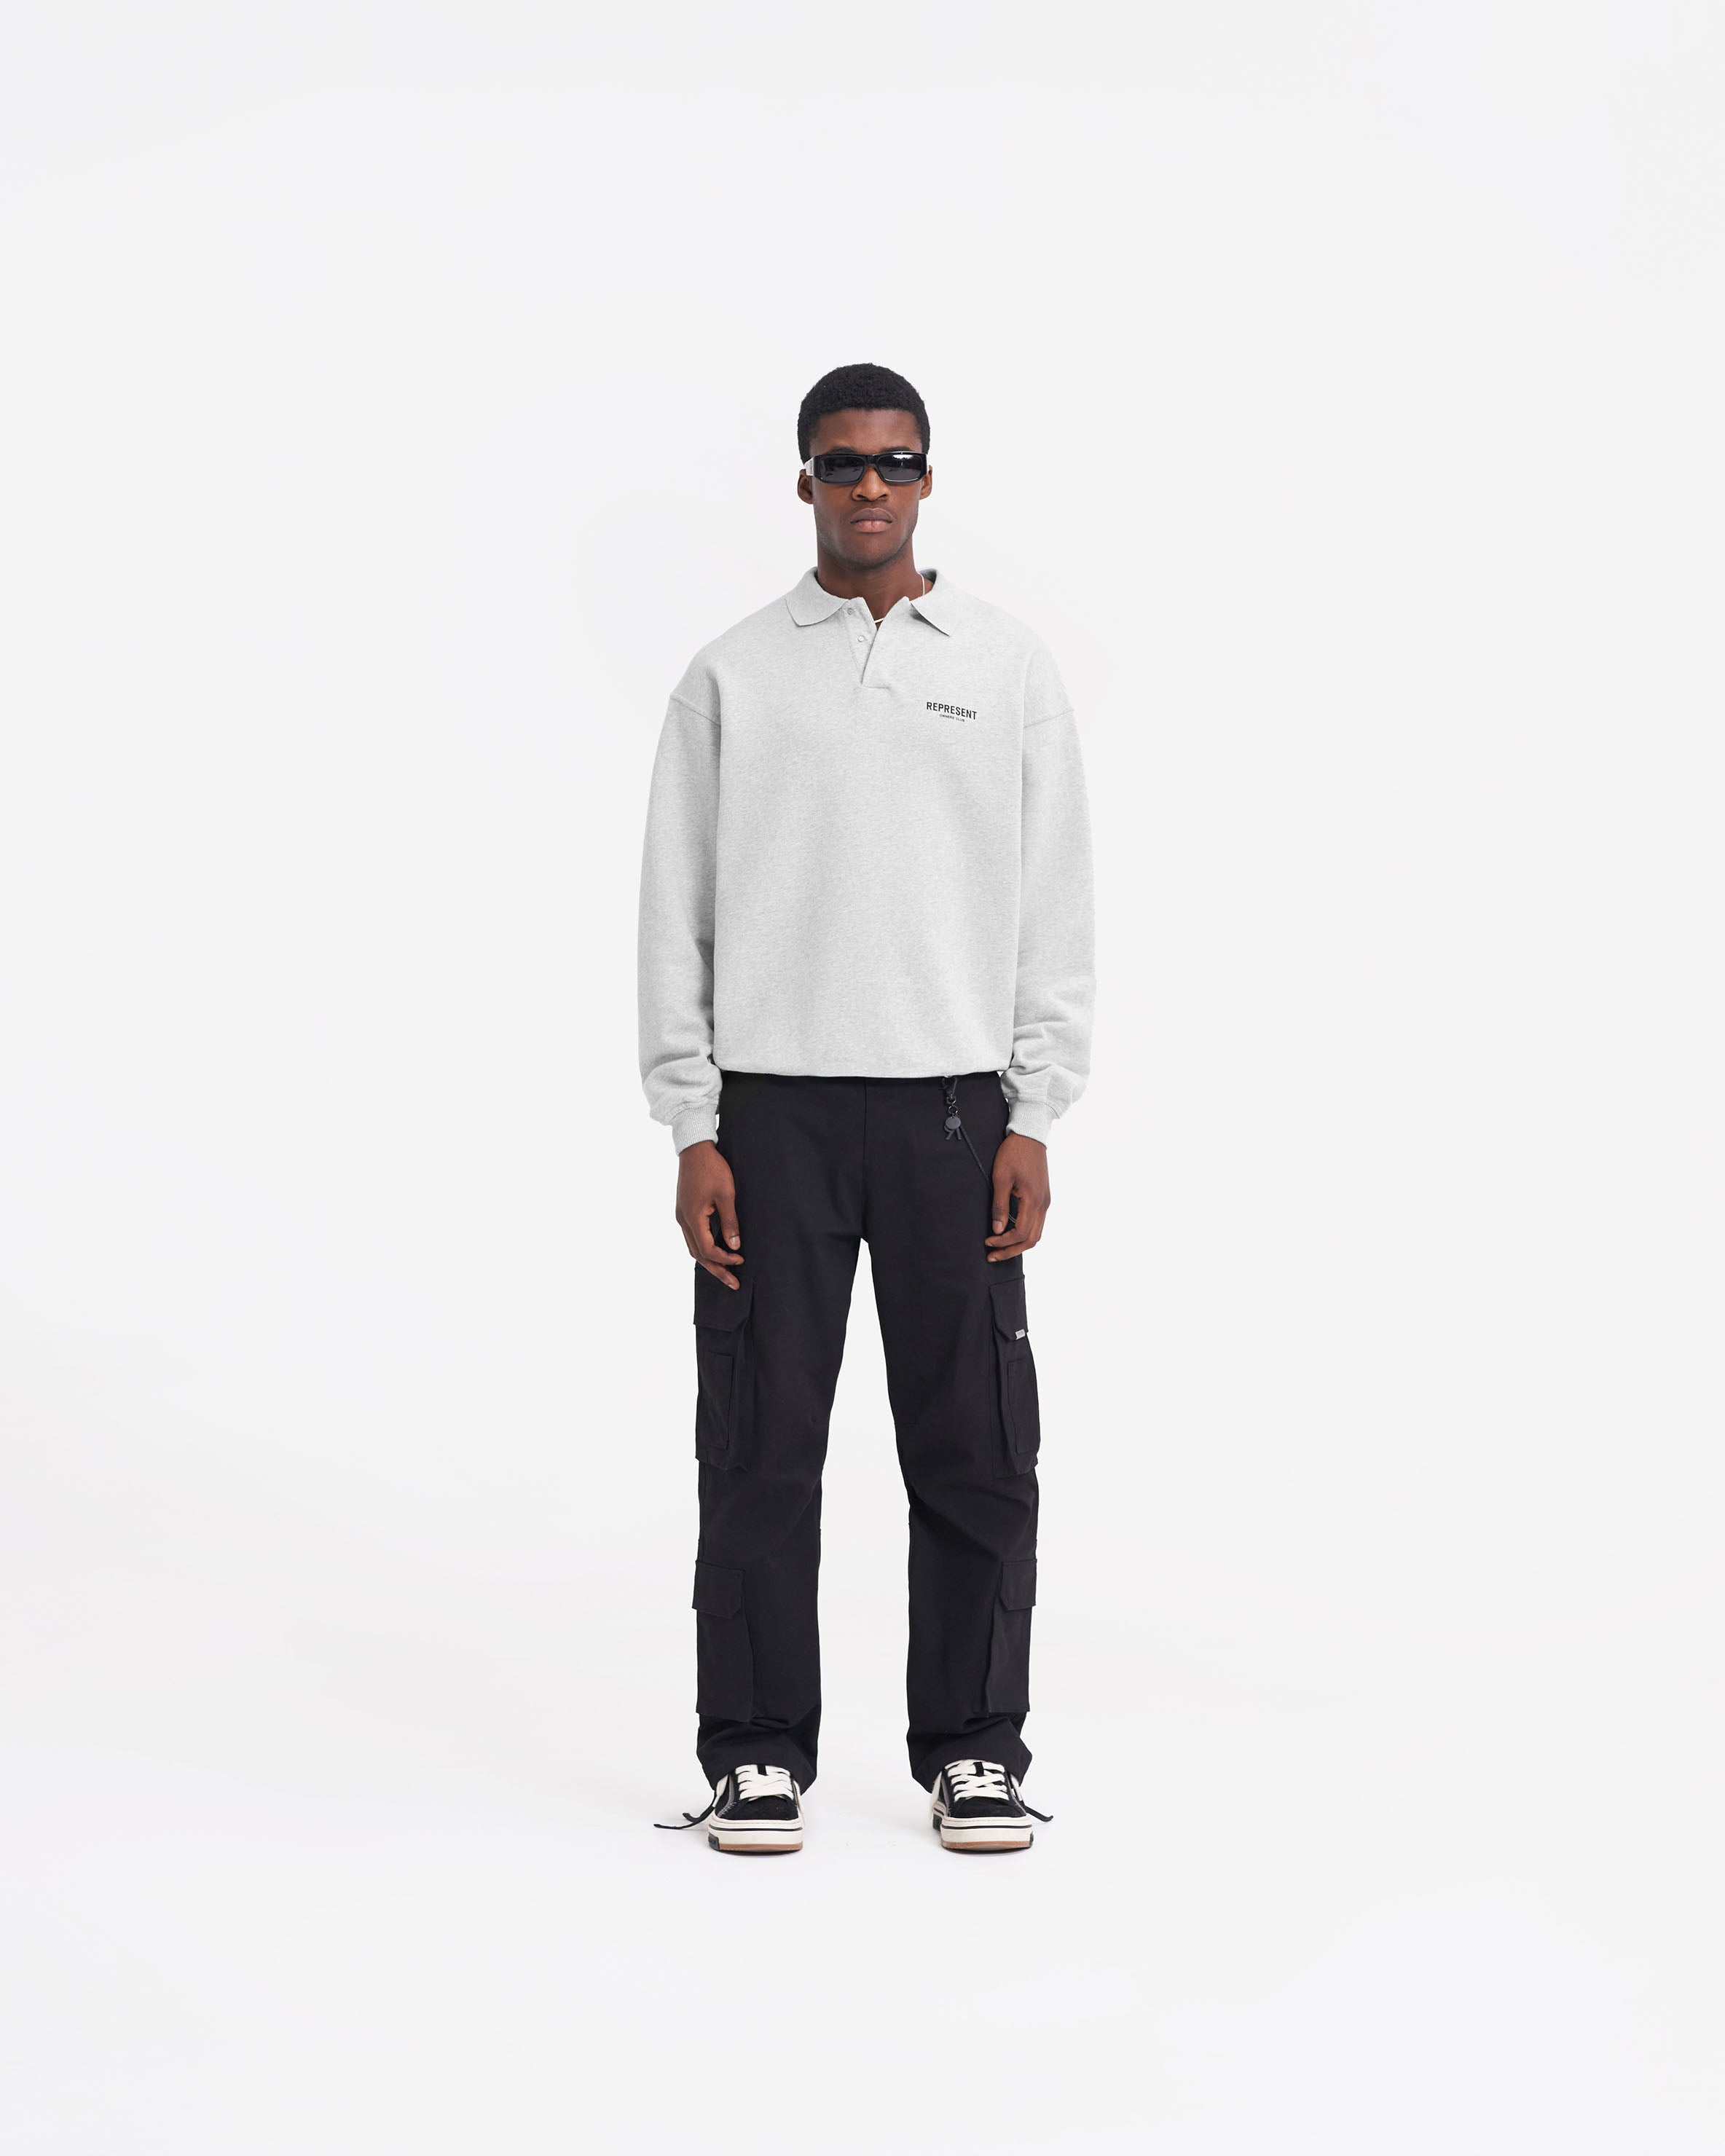 Represent Owners Club Long Sleeve Polo Sweater - Ash Grey